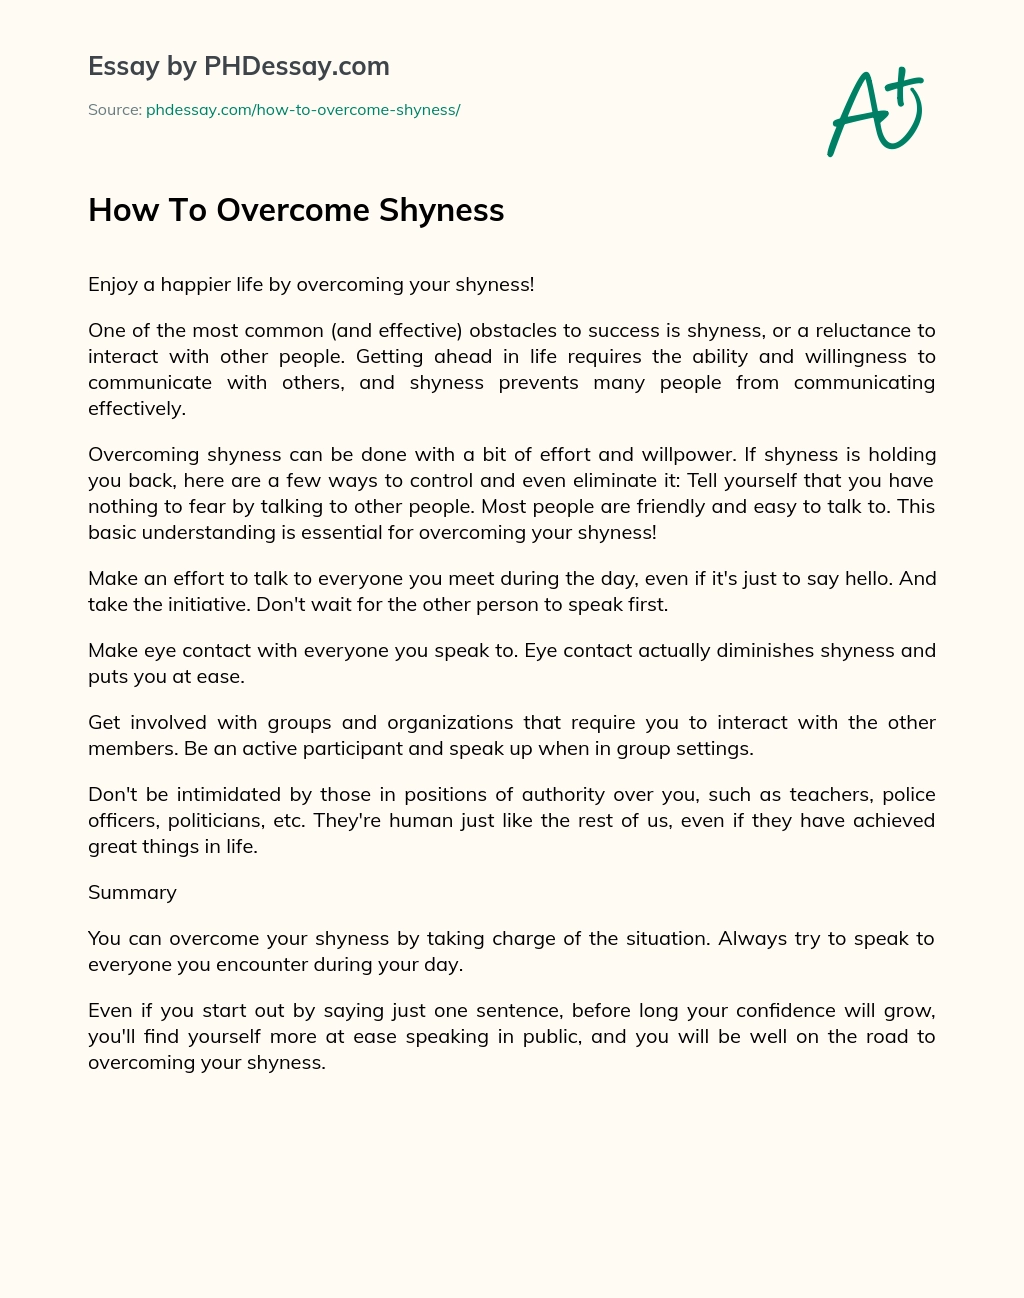 How To Overcome Shyness essay